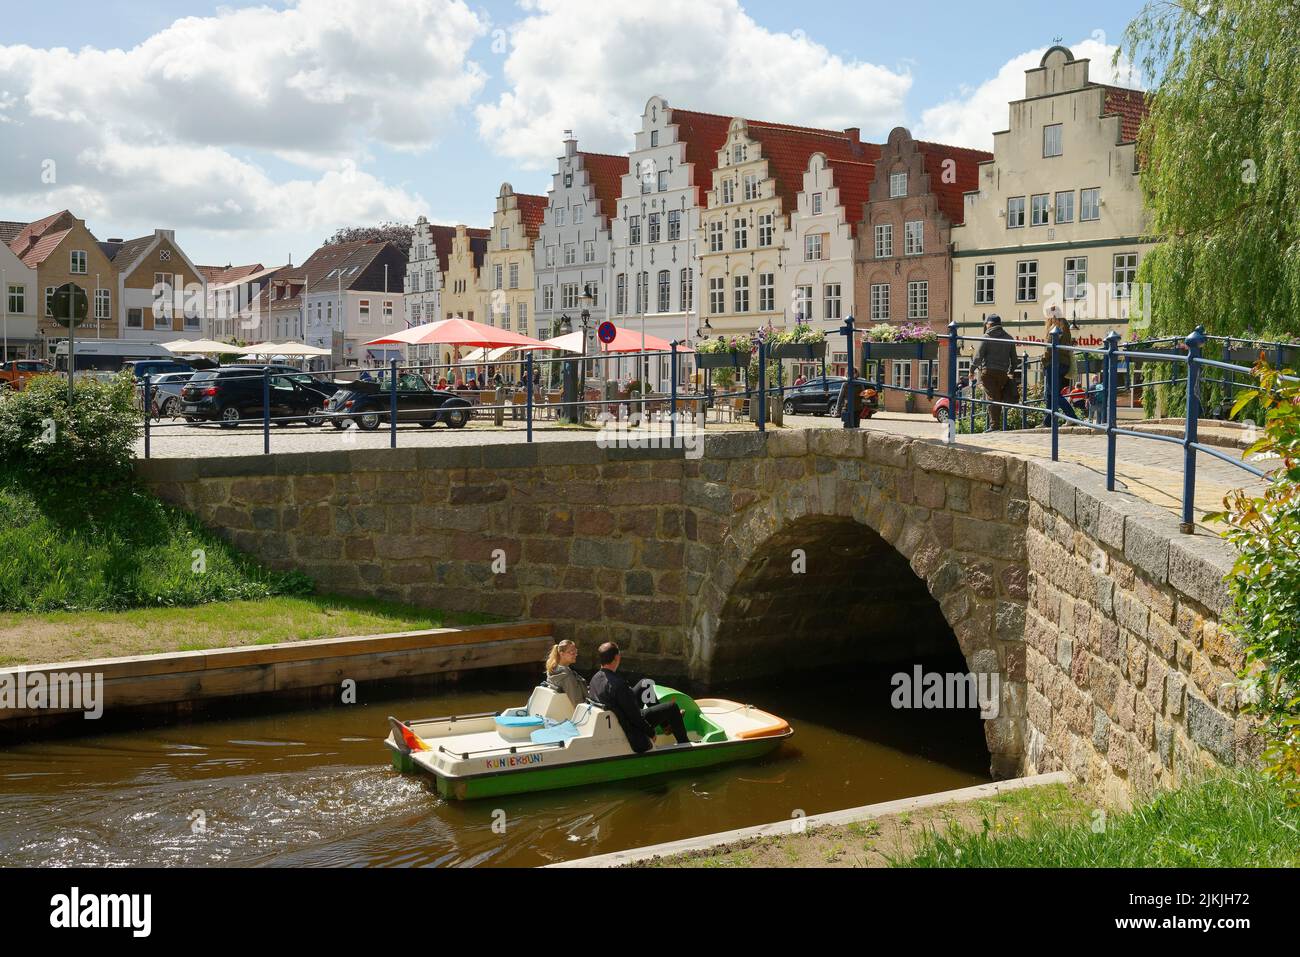 Middle moat and town houses at the market place of Friedrichstadt, Friedrichstadt, the Dutch town on the Eiderstedt peninsula, North Frisia, Eiderstedt peninsula, Schleswig-Holstein, Germany Stock Photo